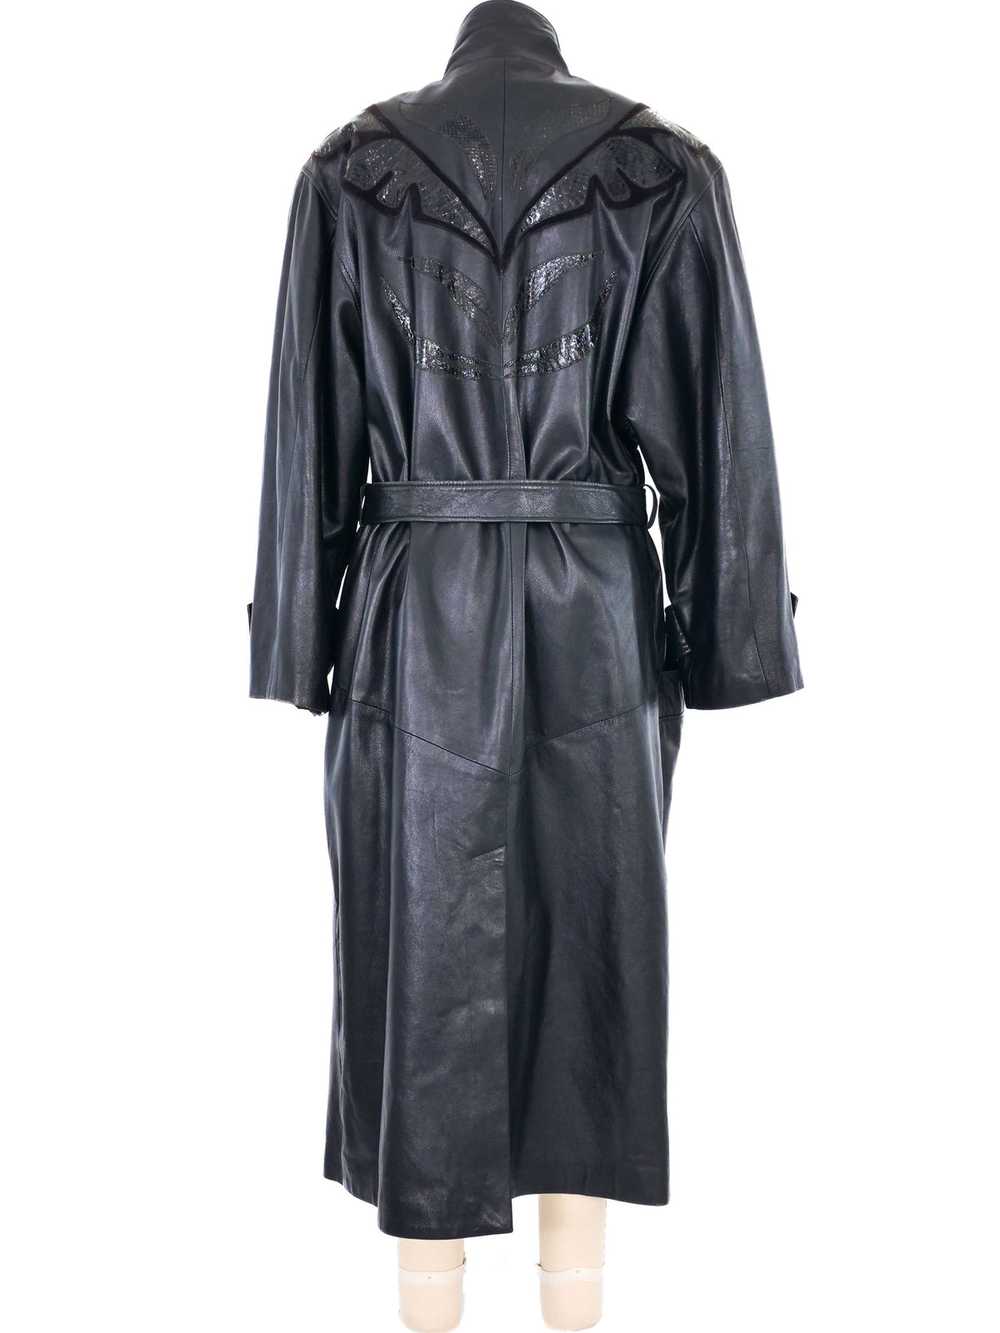 1980s Leather Applique Trench Coat - image 5